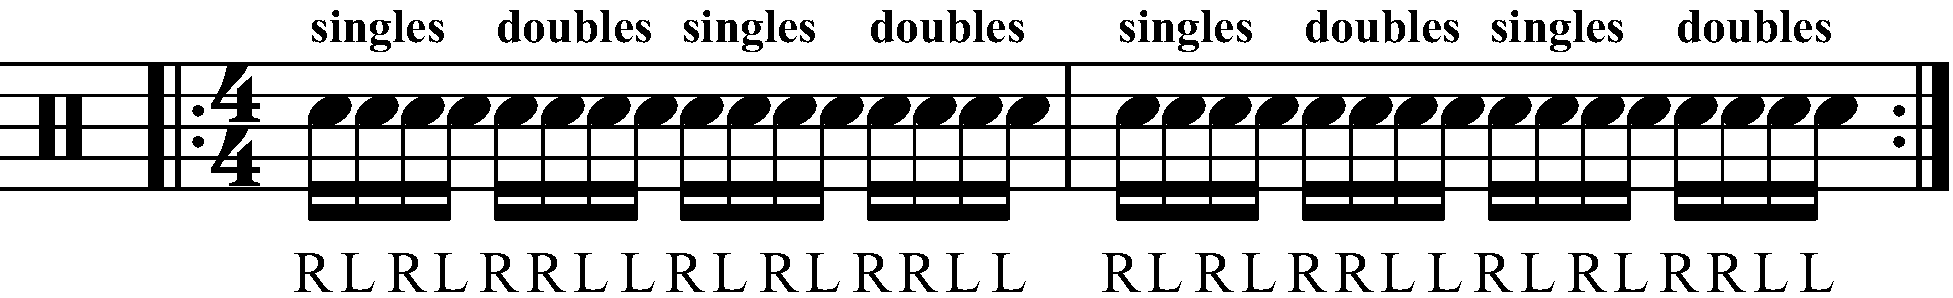 Singles To Doubles As Sixteenth Notes